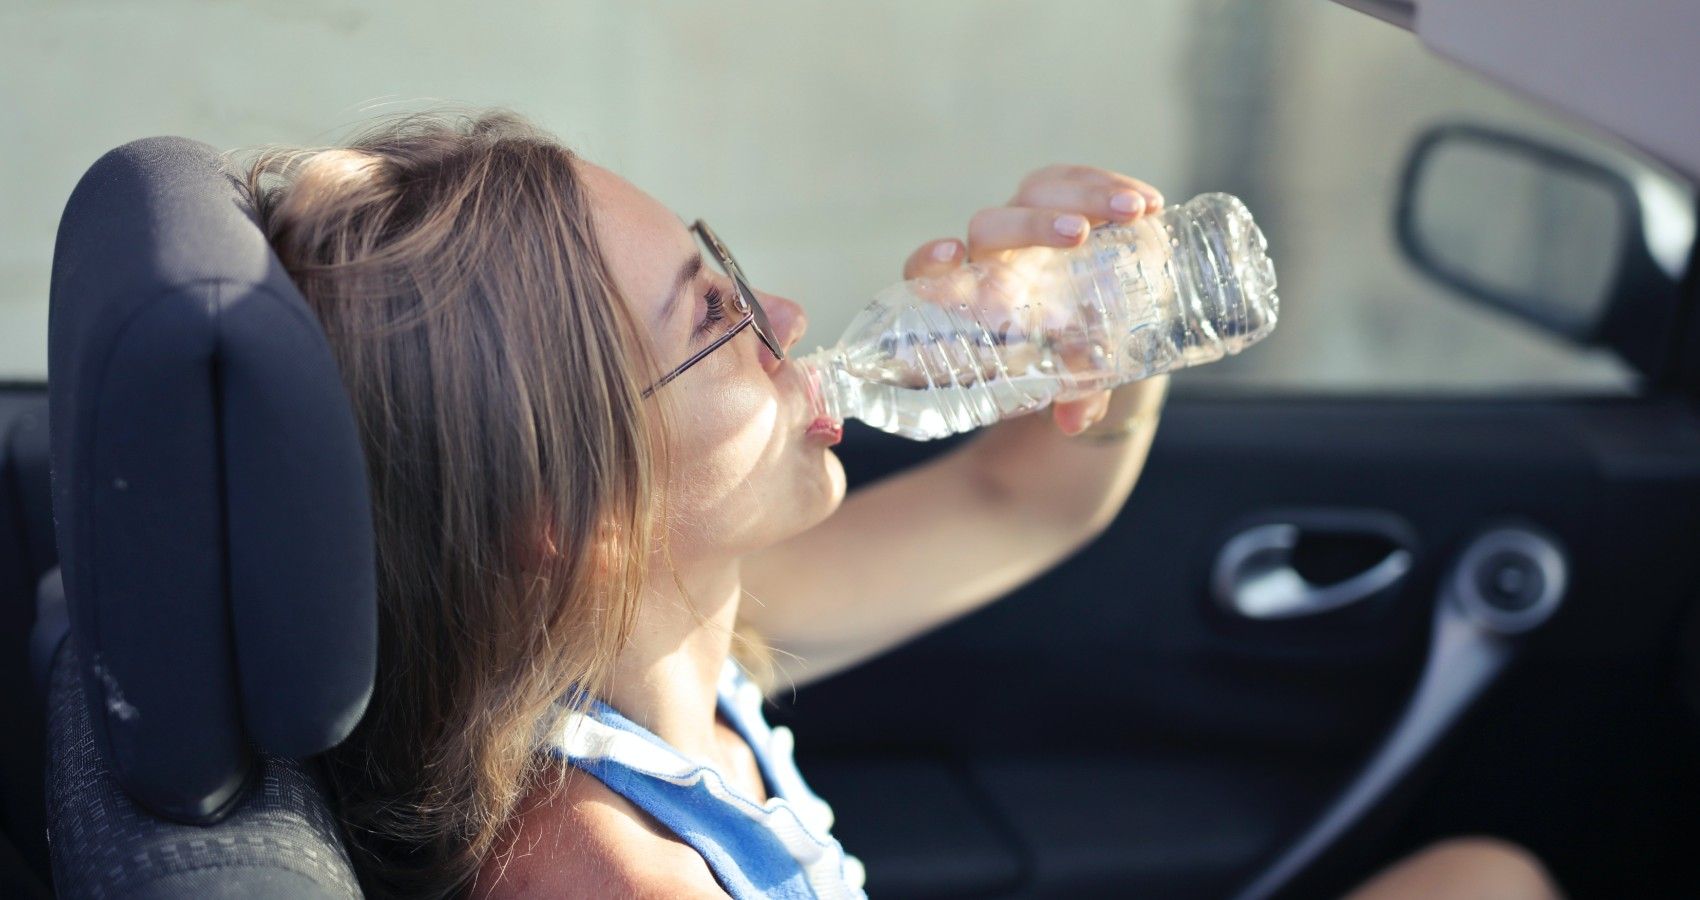 A teenager driving a car while drinking water